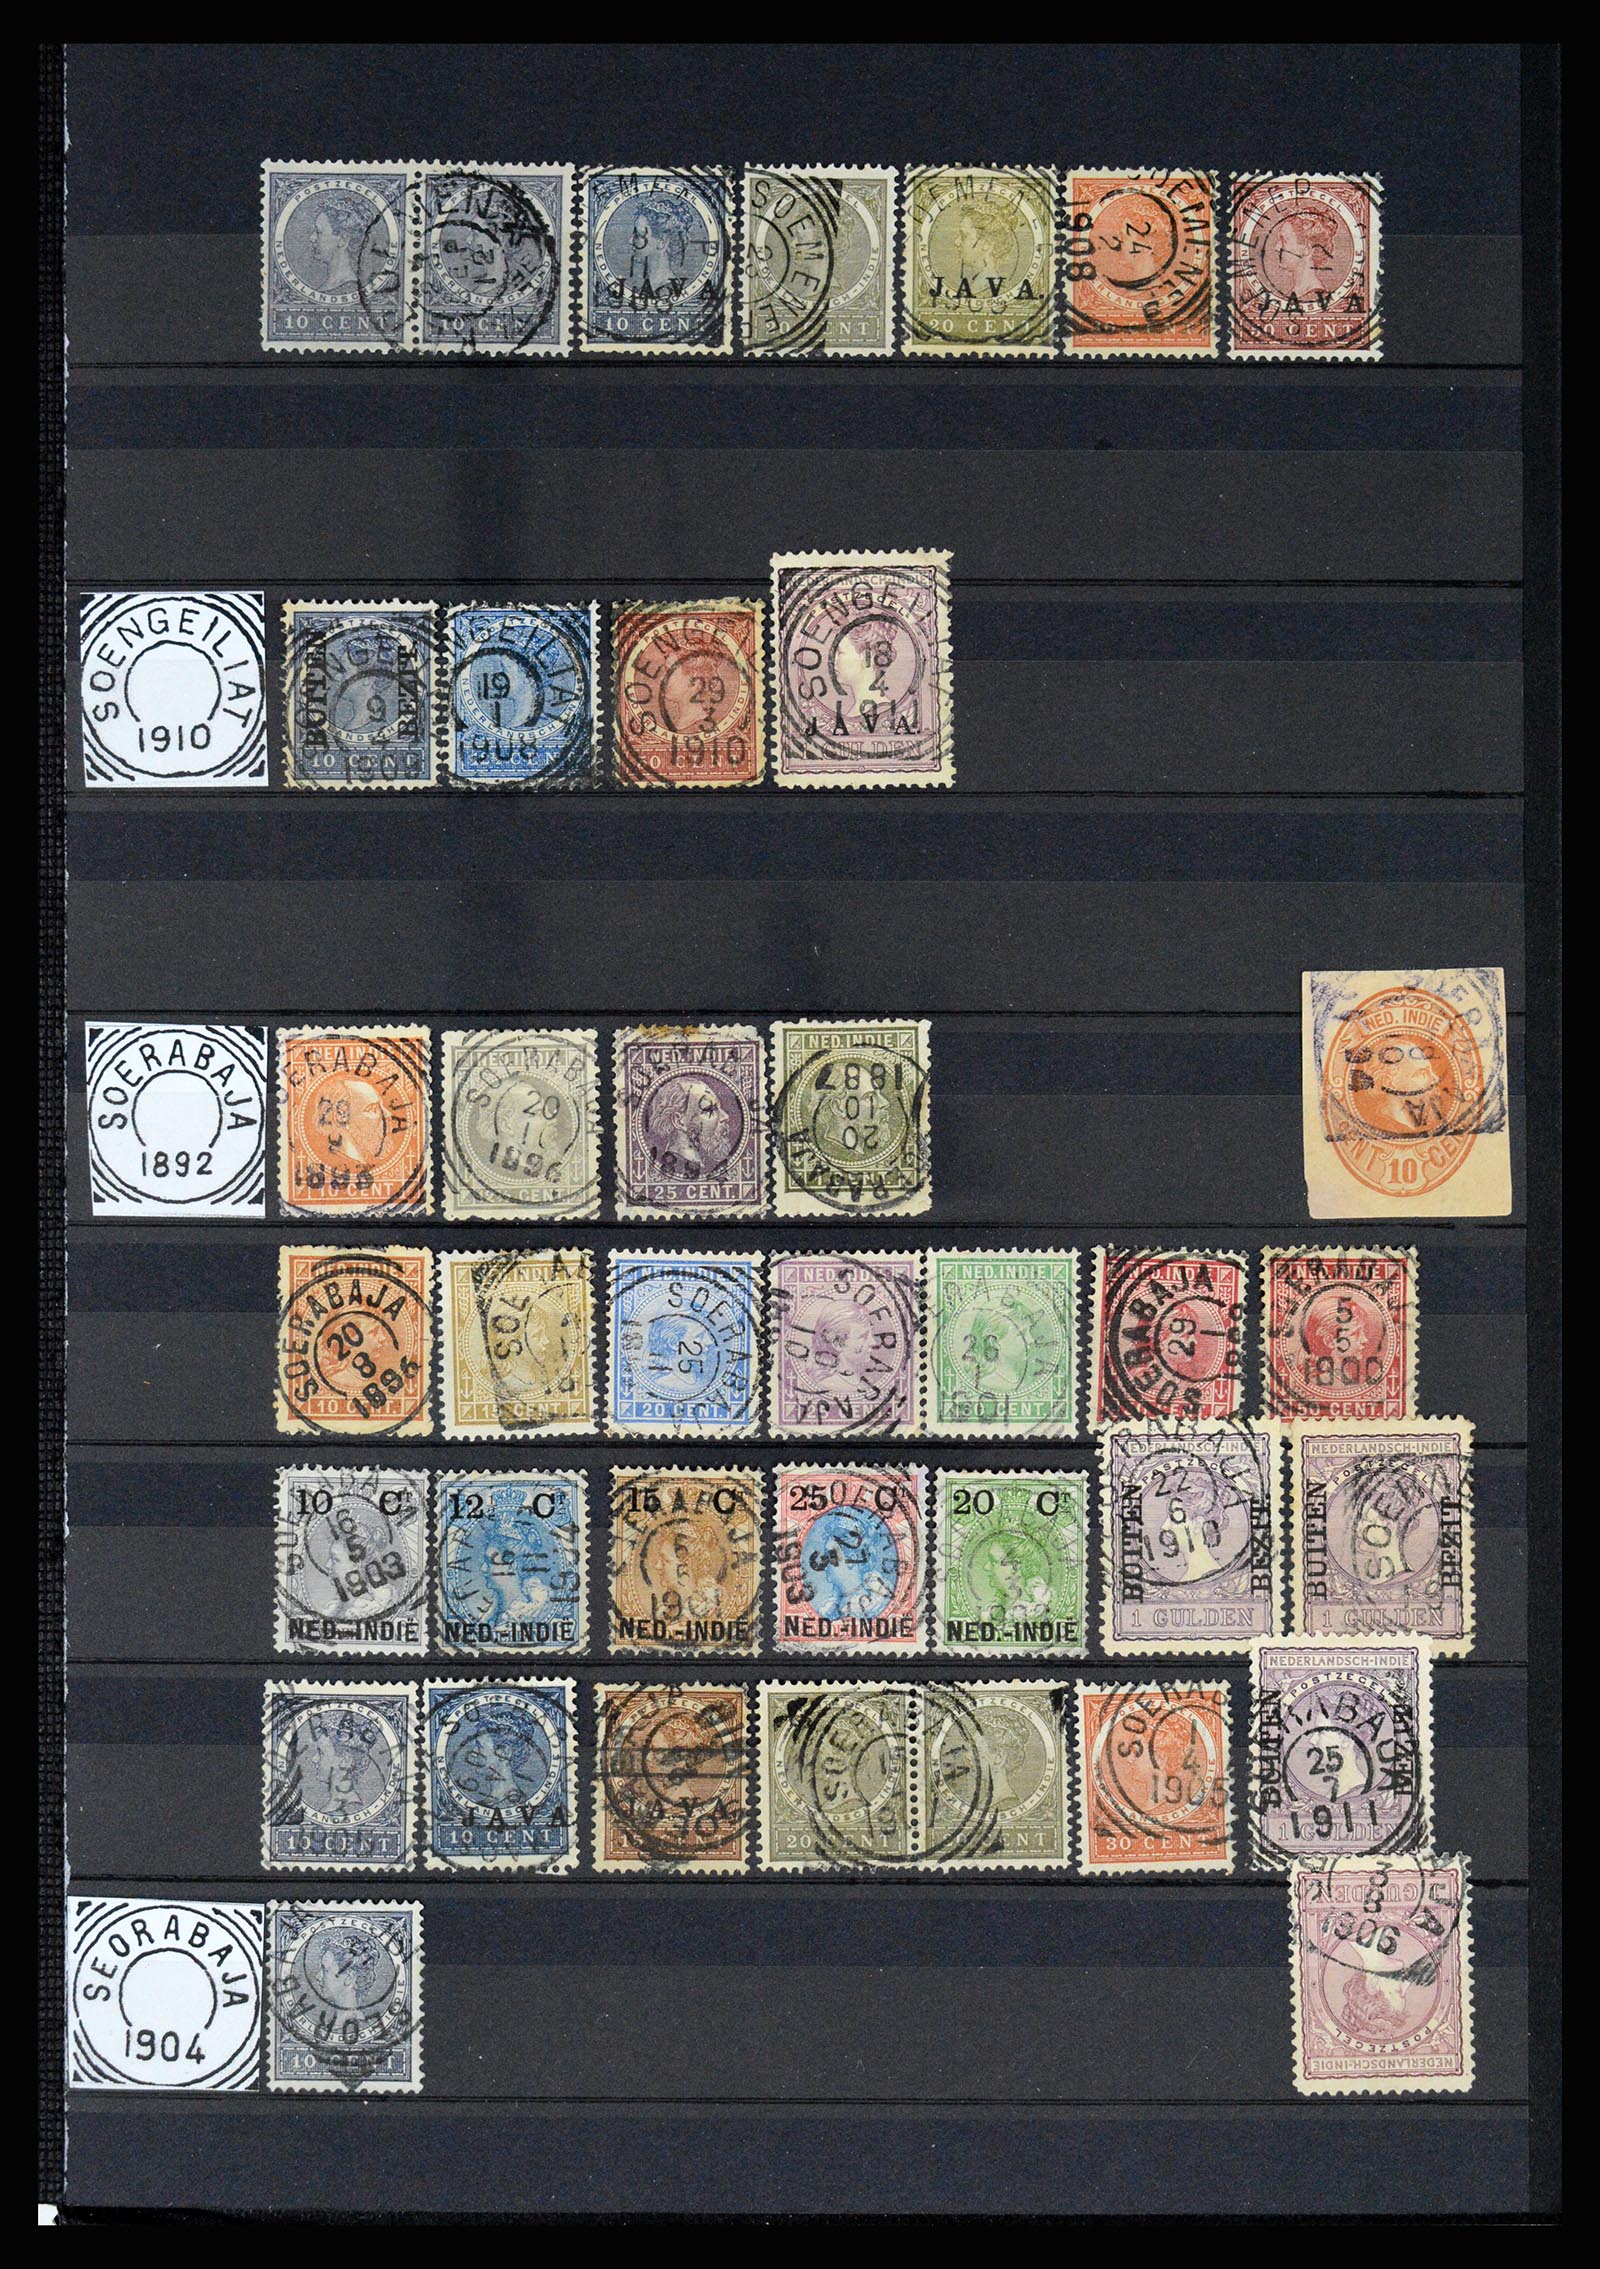 36839 050 - Stamp collection 36839 Dutch east Indies square cancels.